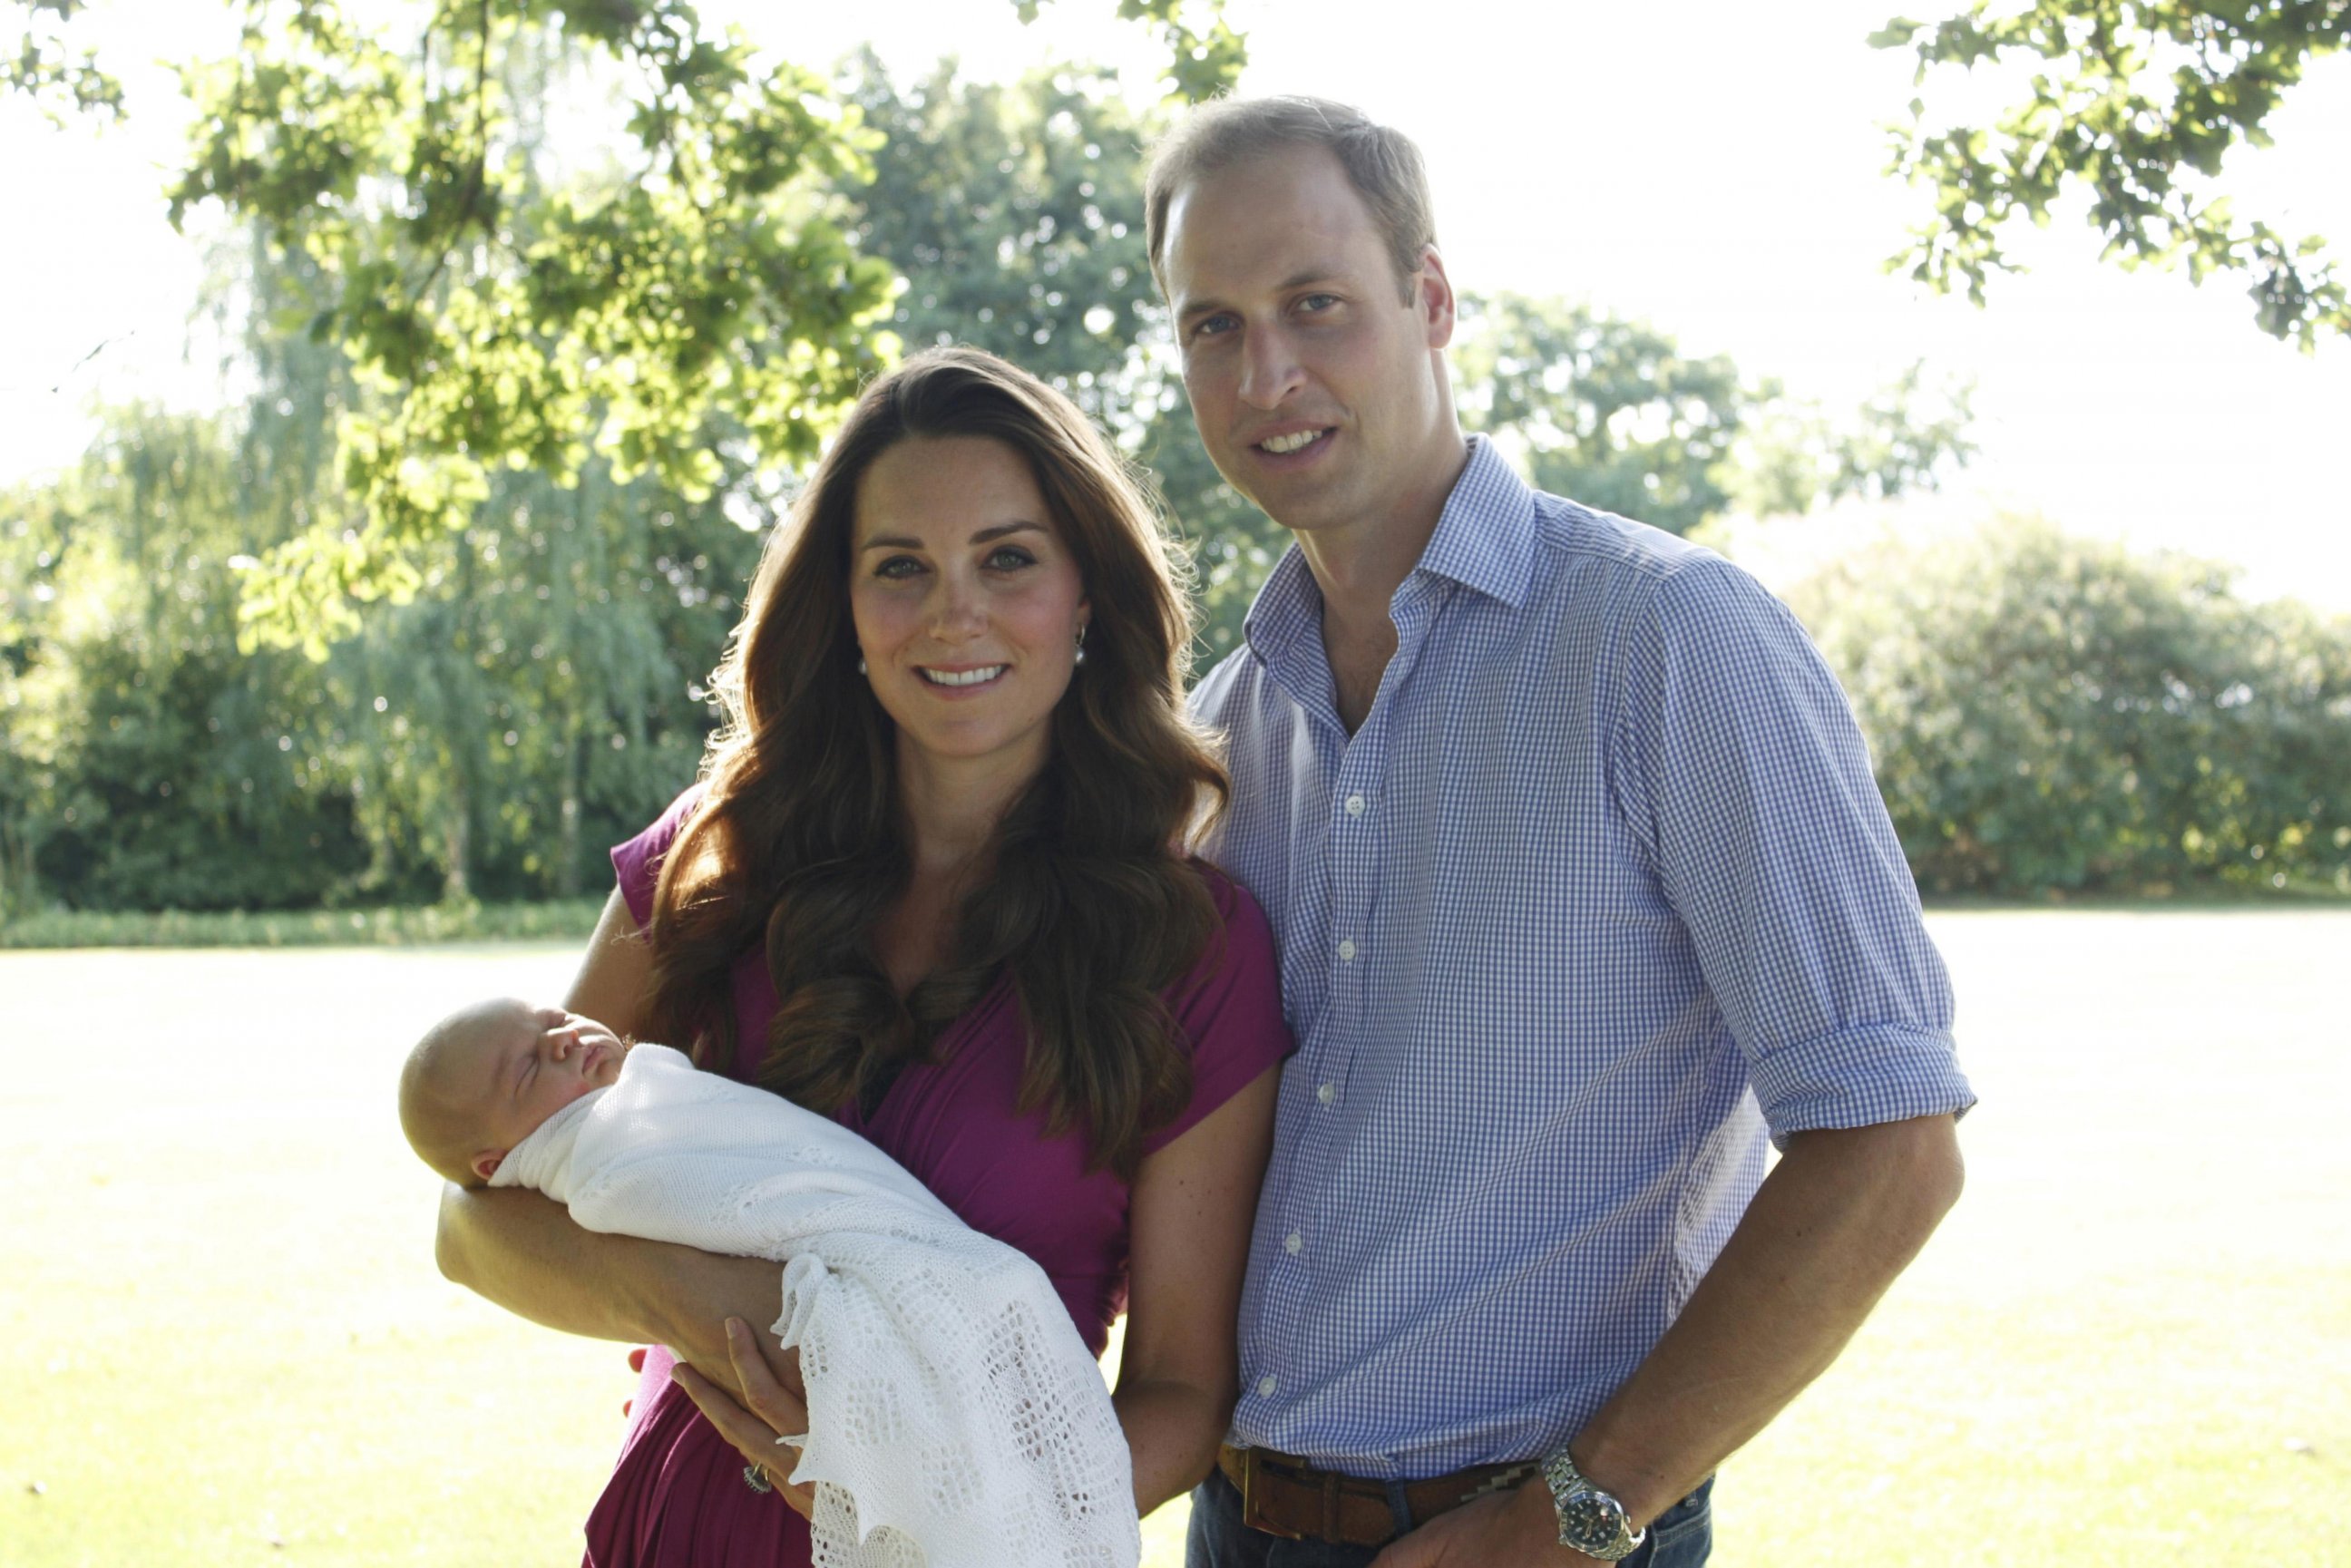 PHOTO: The Duke and Duchess of Cambridge 2013. This Seraphine pink fuchsia maternity dress sold out after this photo was released. 